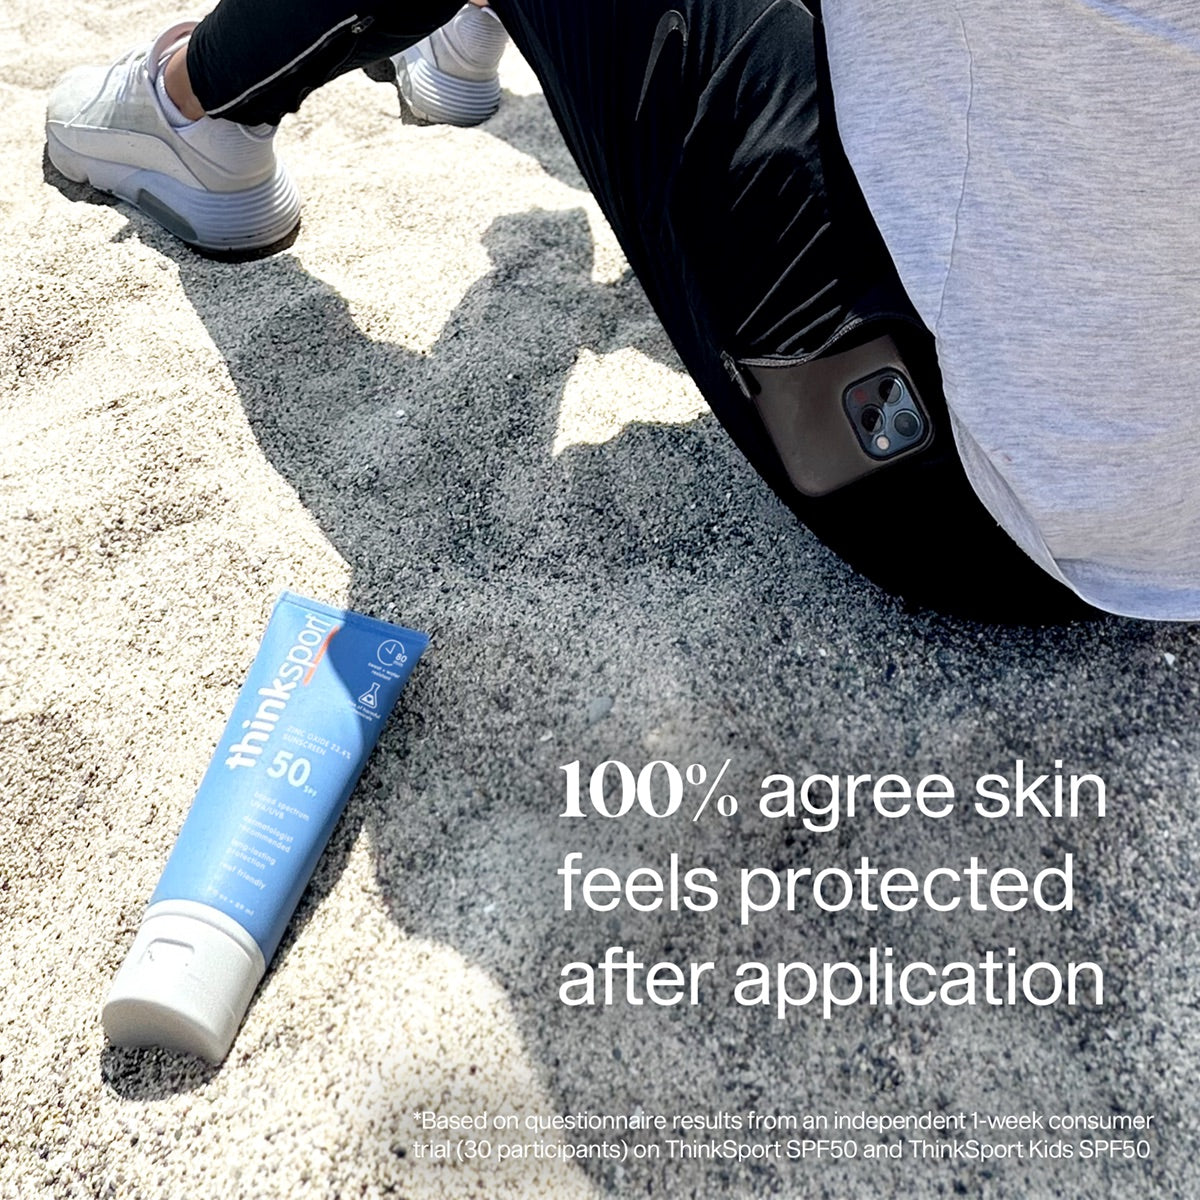 A tube of ThinkSport SPF 50 sunscreen on the ground with a person sitting in the background, with text stating &#39;100% agree skin feels protected after application.&#39;